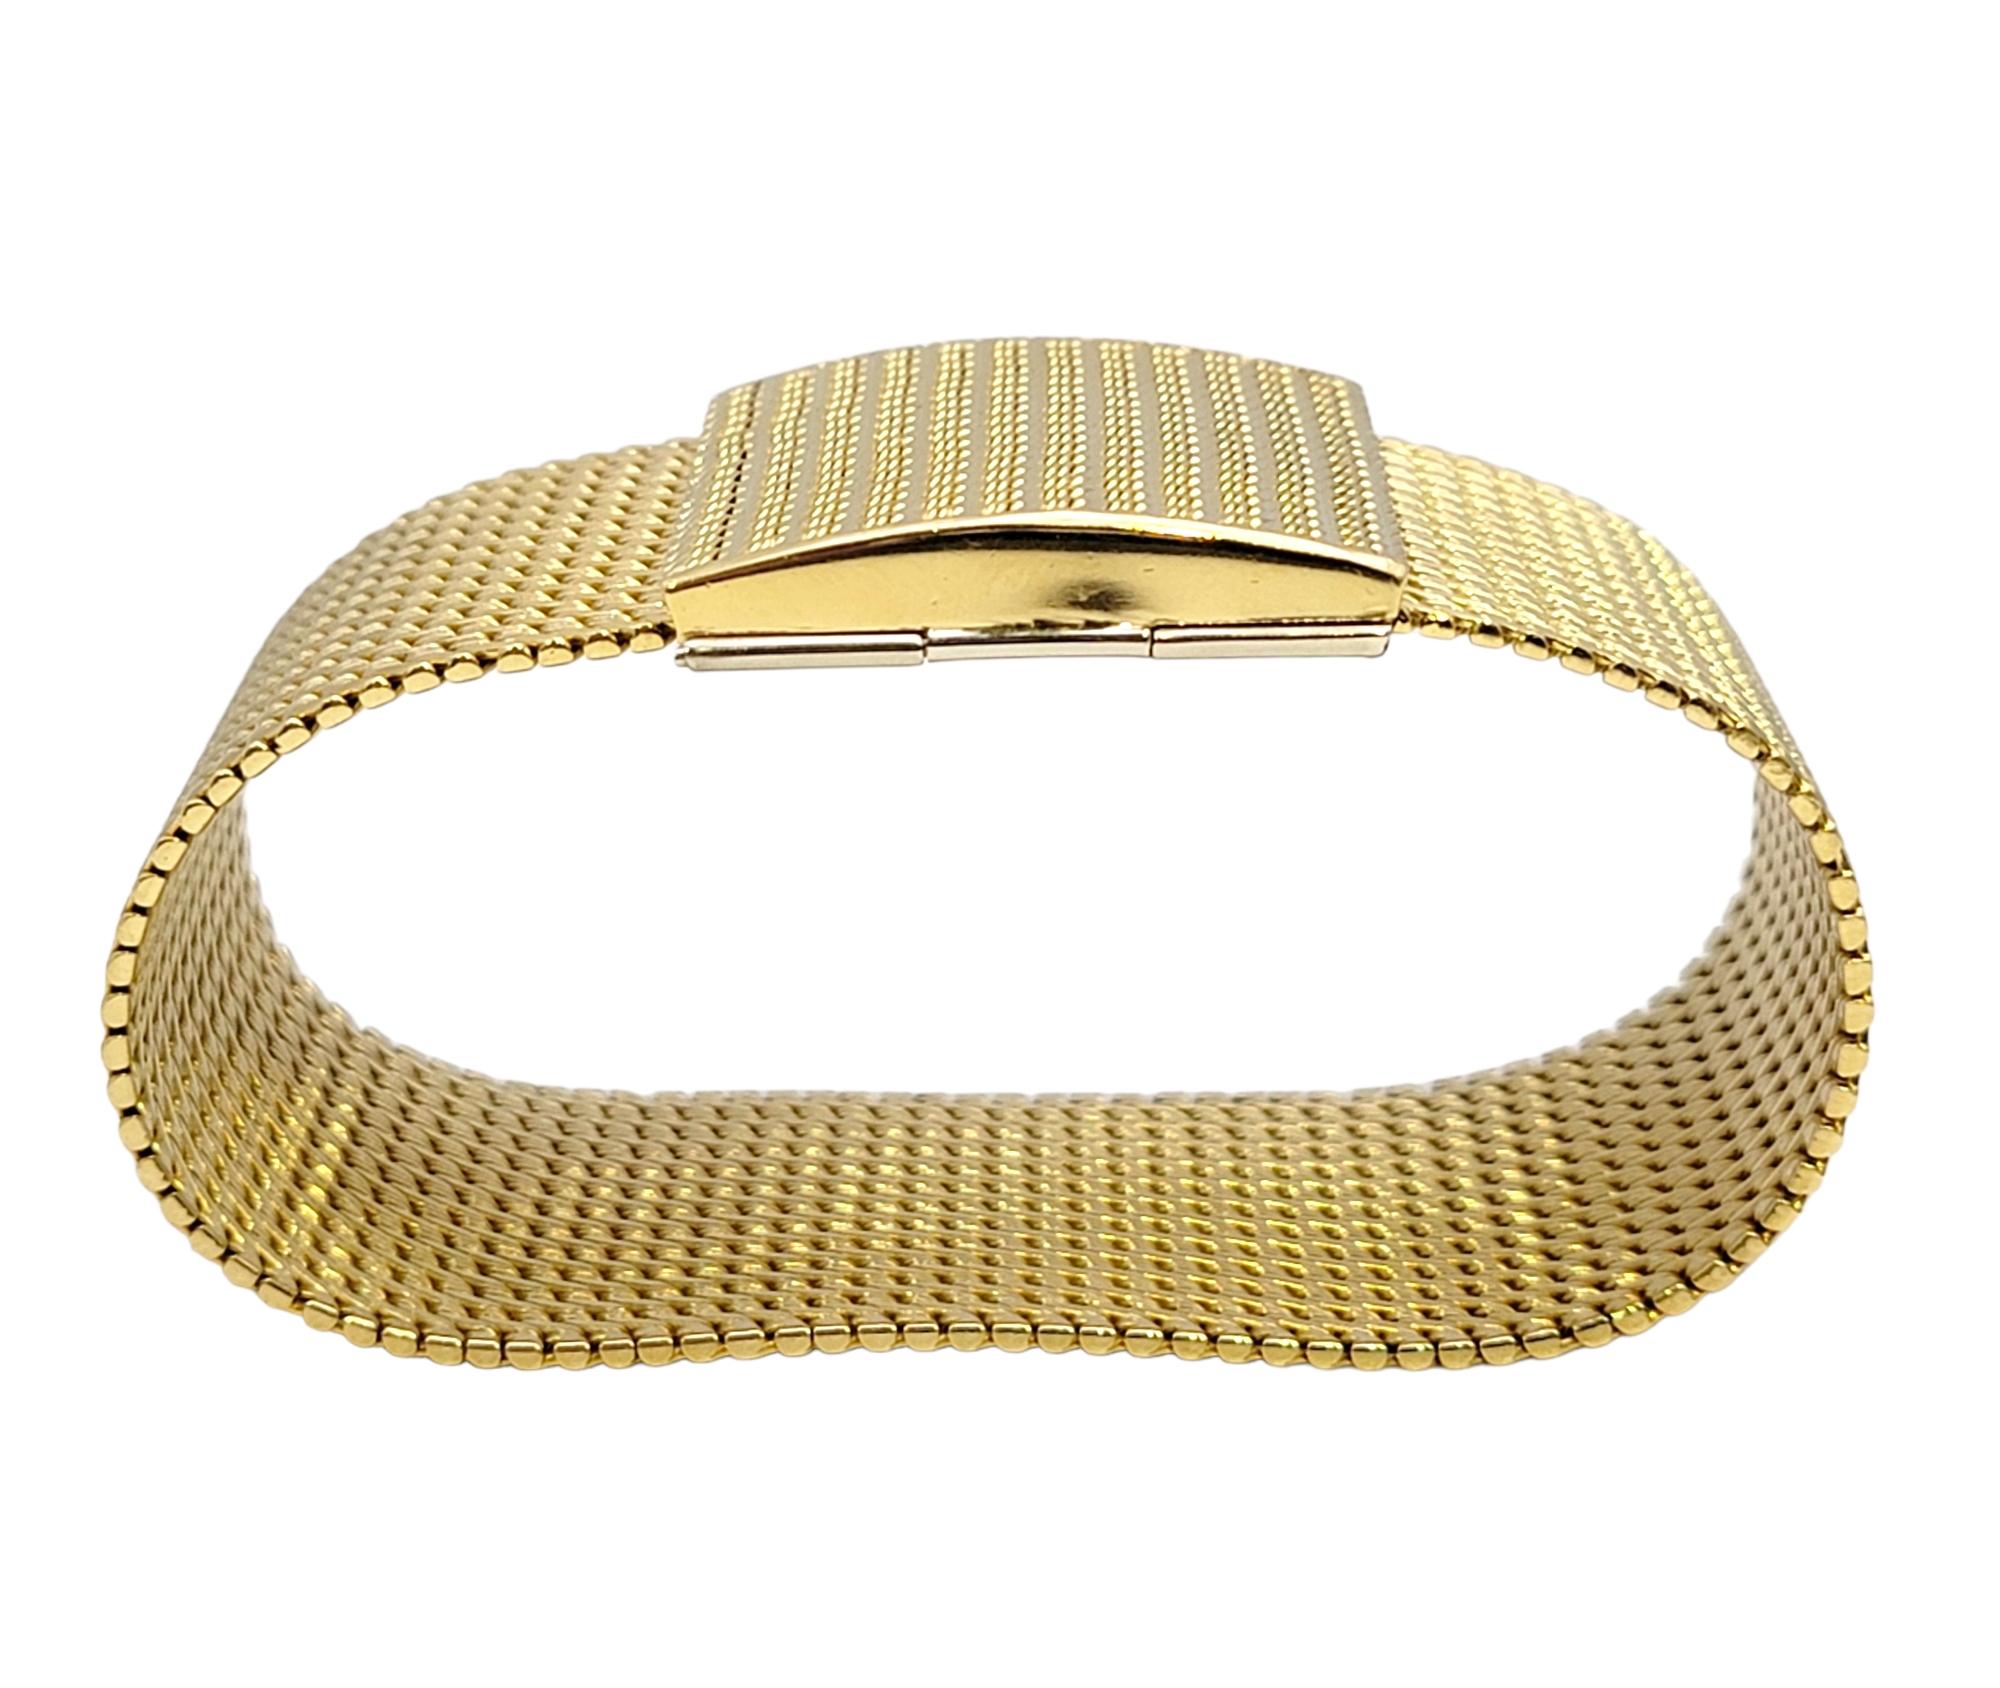 Women's or Men's Vintage Textured 18 Karat Yellow Gold Wide Mesh Bracelet with Big Square Clasp For Sale